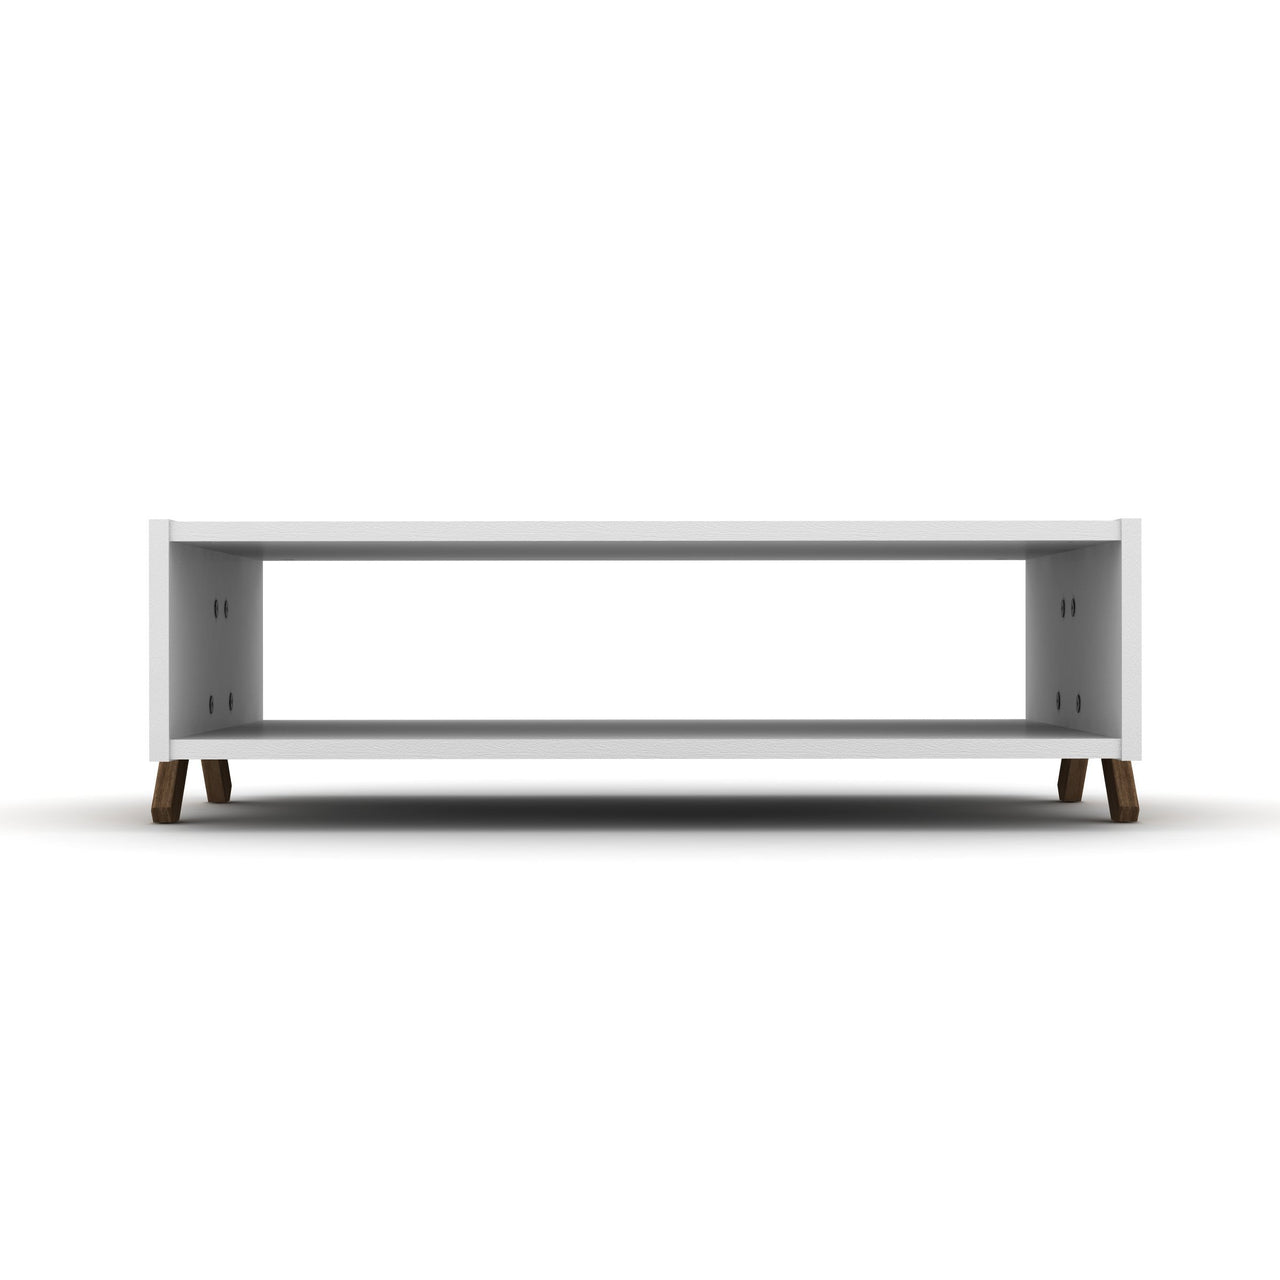 Wooden Frame Rectengular Coffee Table for Living Rooms with Interior Shelving, Walnut/White